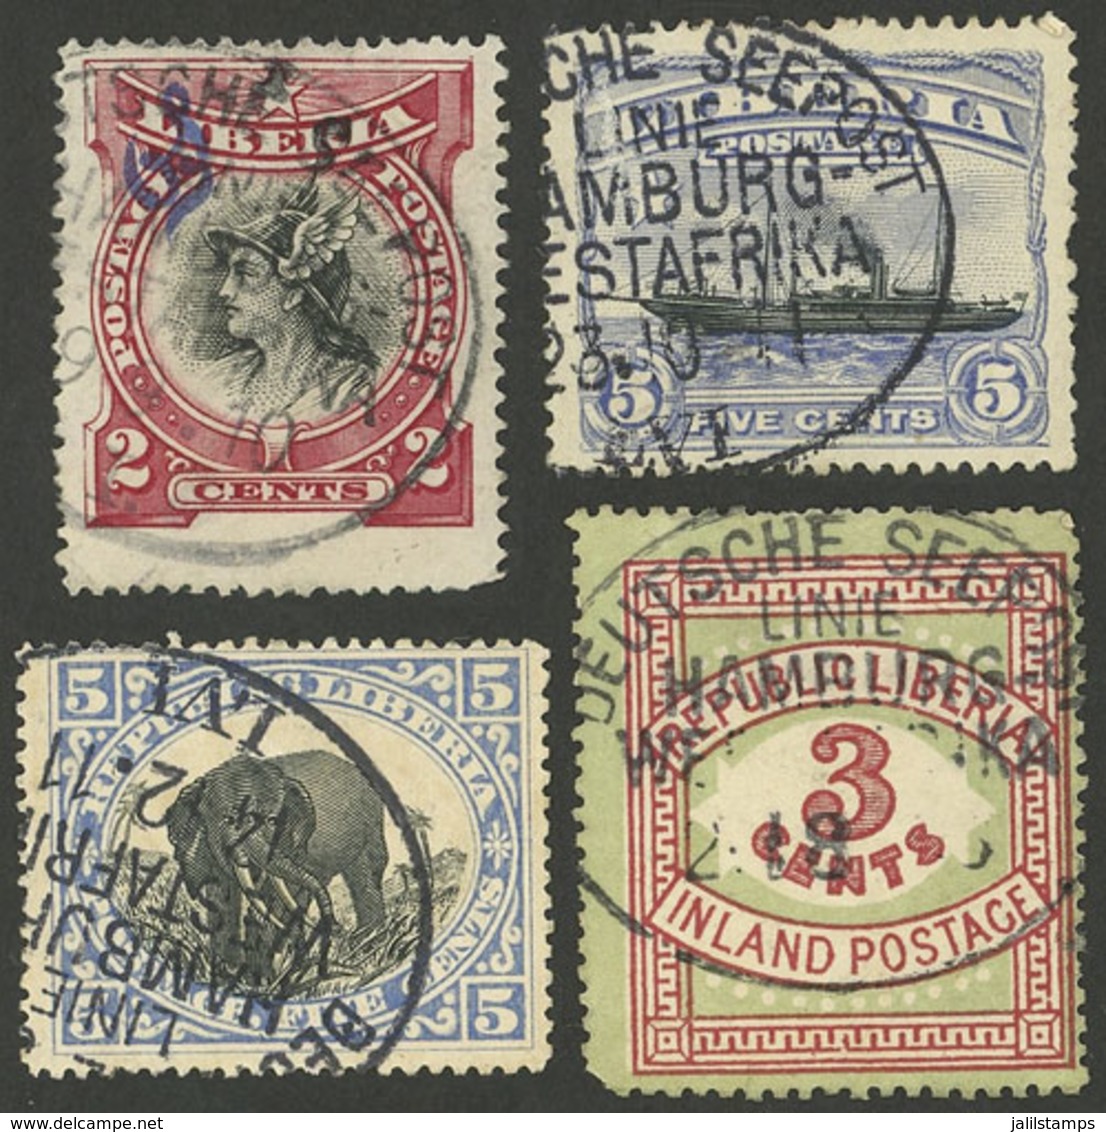 LIBERIA: 4 Old Stamps With Cancels Of GERMAN SHIPS, VF Quality! - Liberia